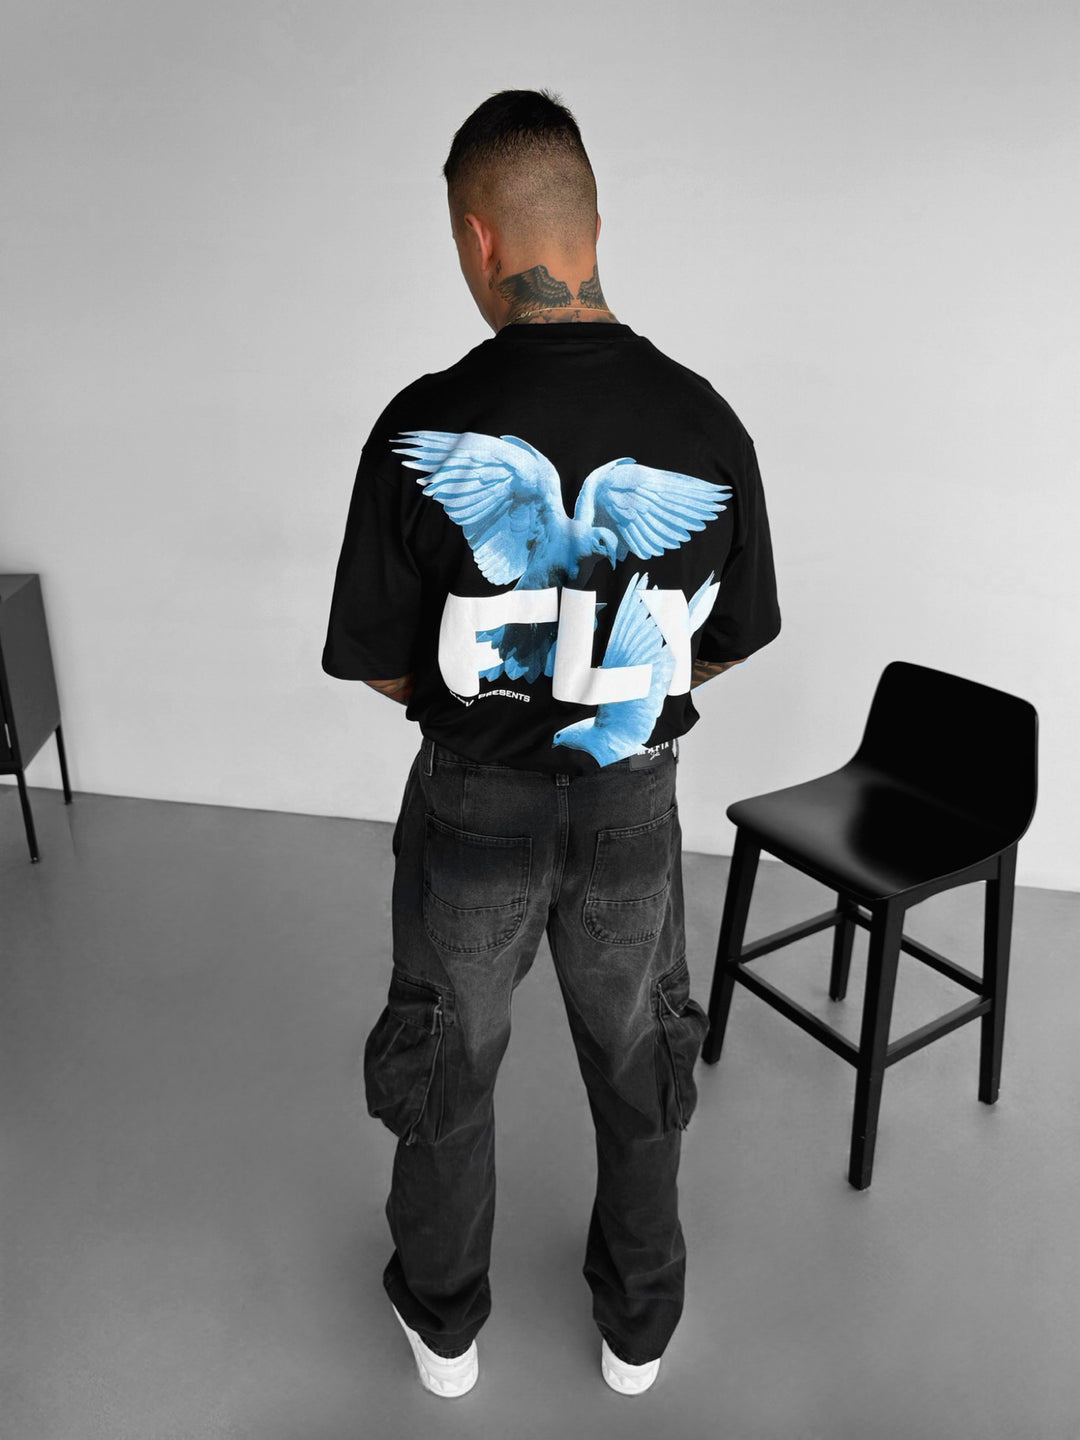 Oversize 'Fly' T-shirt - Black and Blue